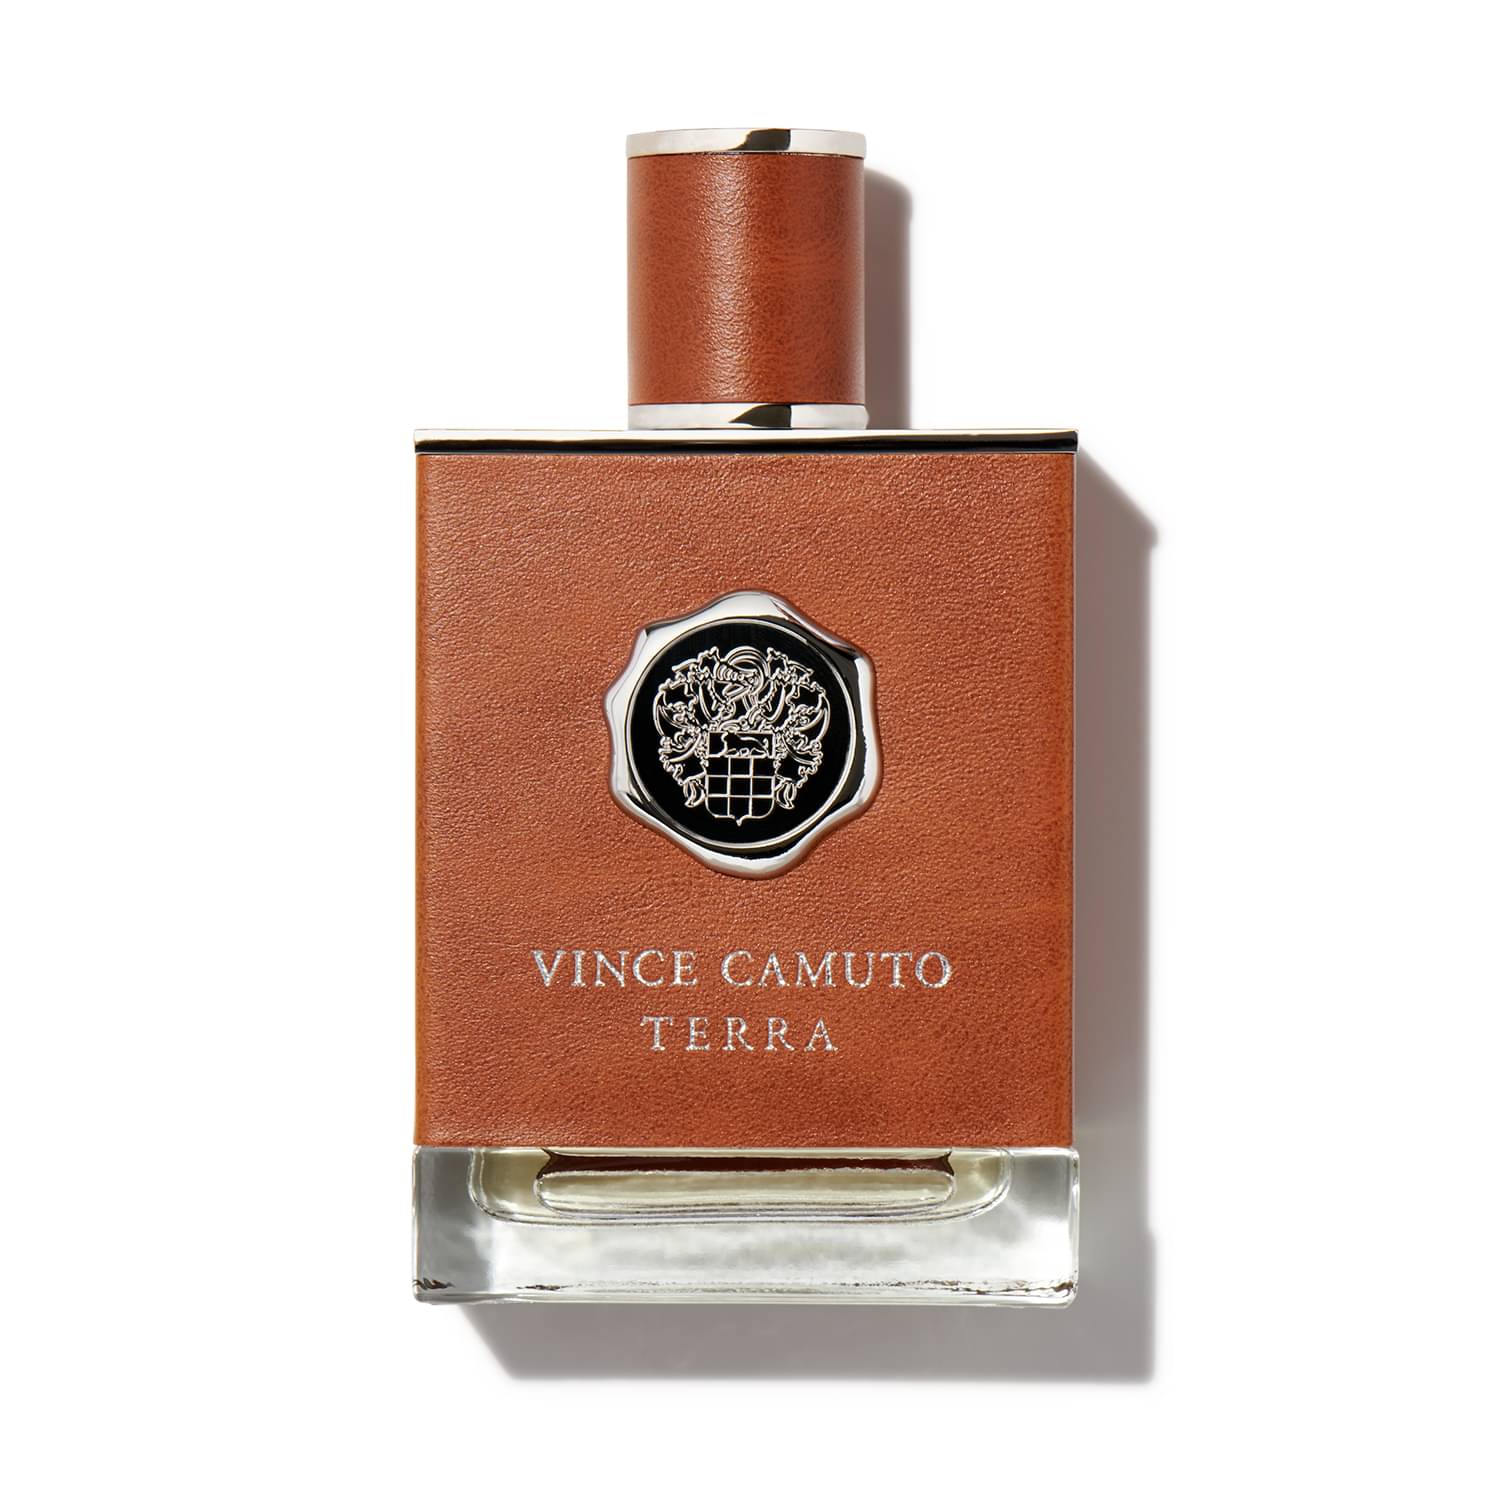 Score VINCE CAMUTO Terra Extreme at Scentbird for $16.95